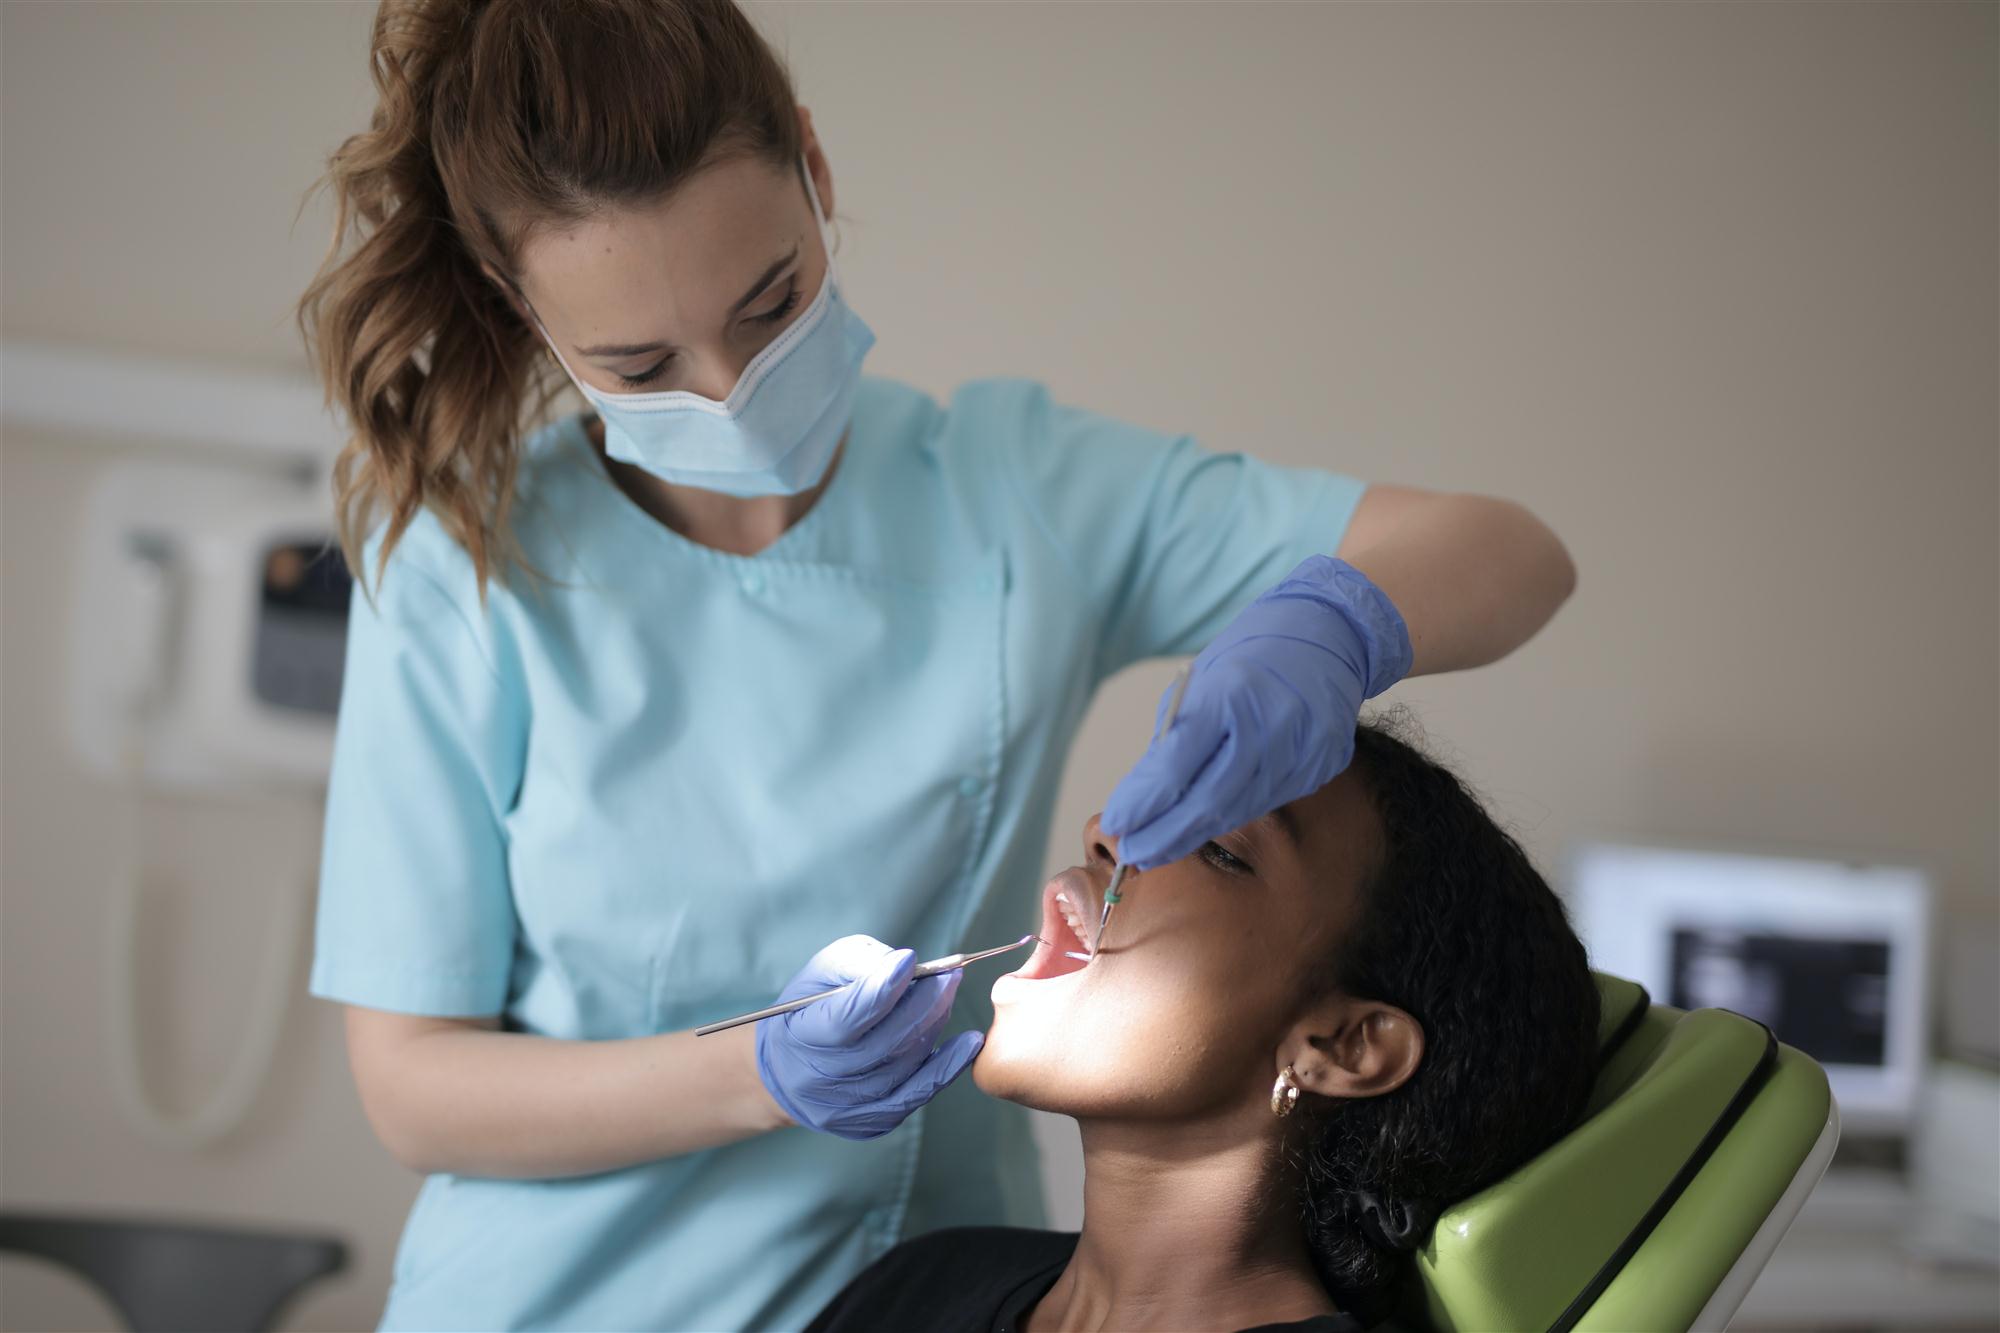 Teeth cleaning to maintain oral health